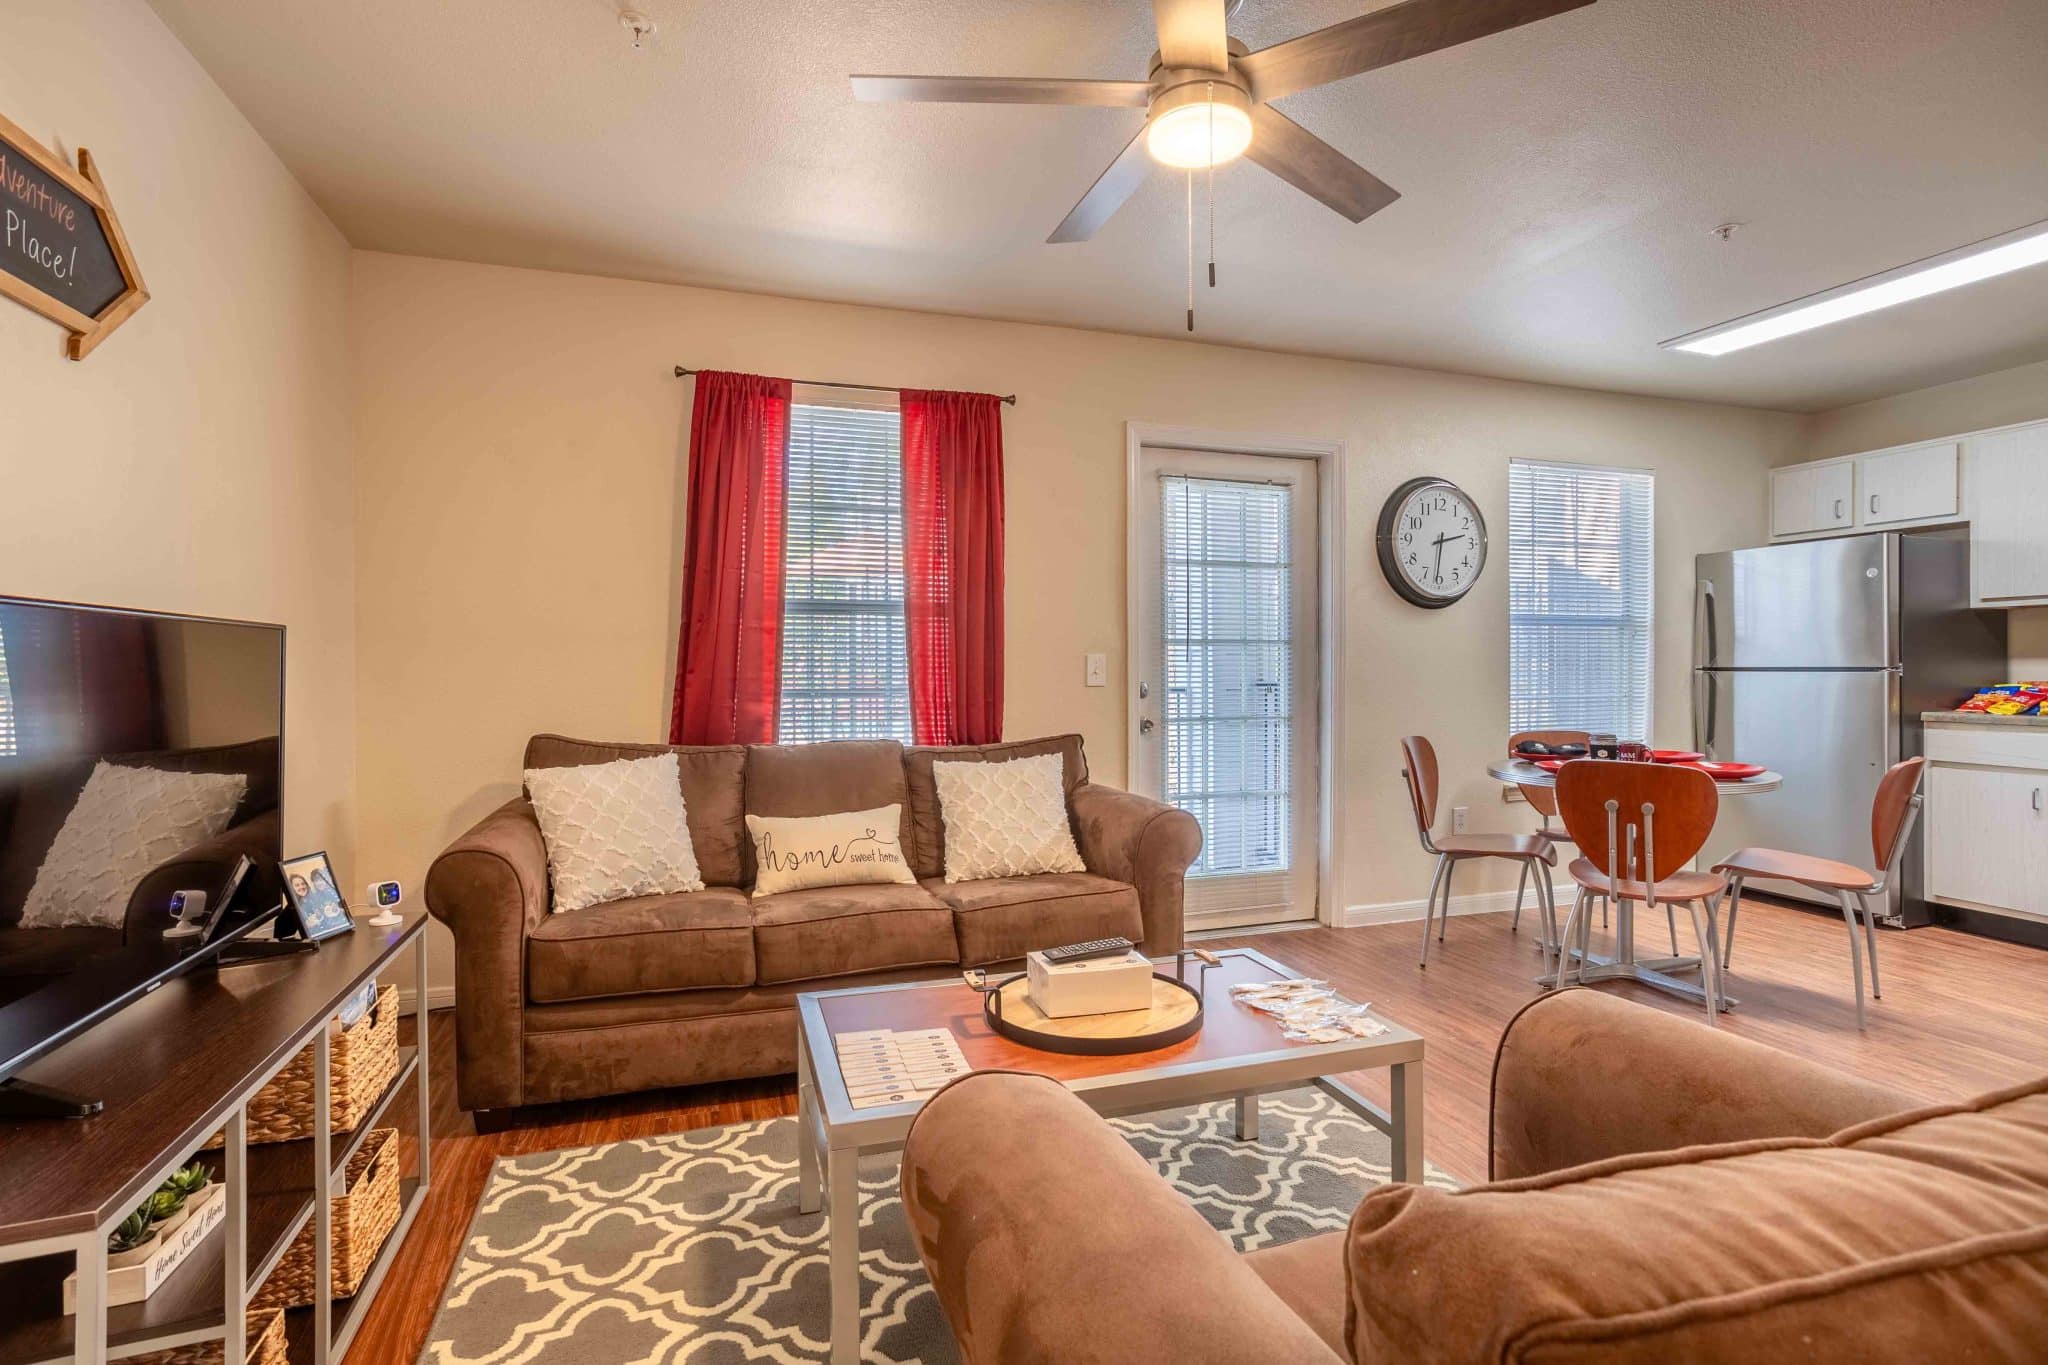 crossing place college station off campus apartments near texas a and m fully furnished living room kitchen common area